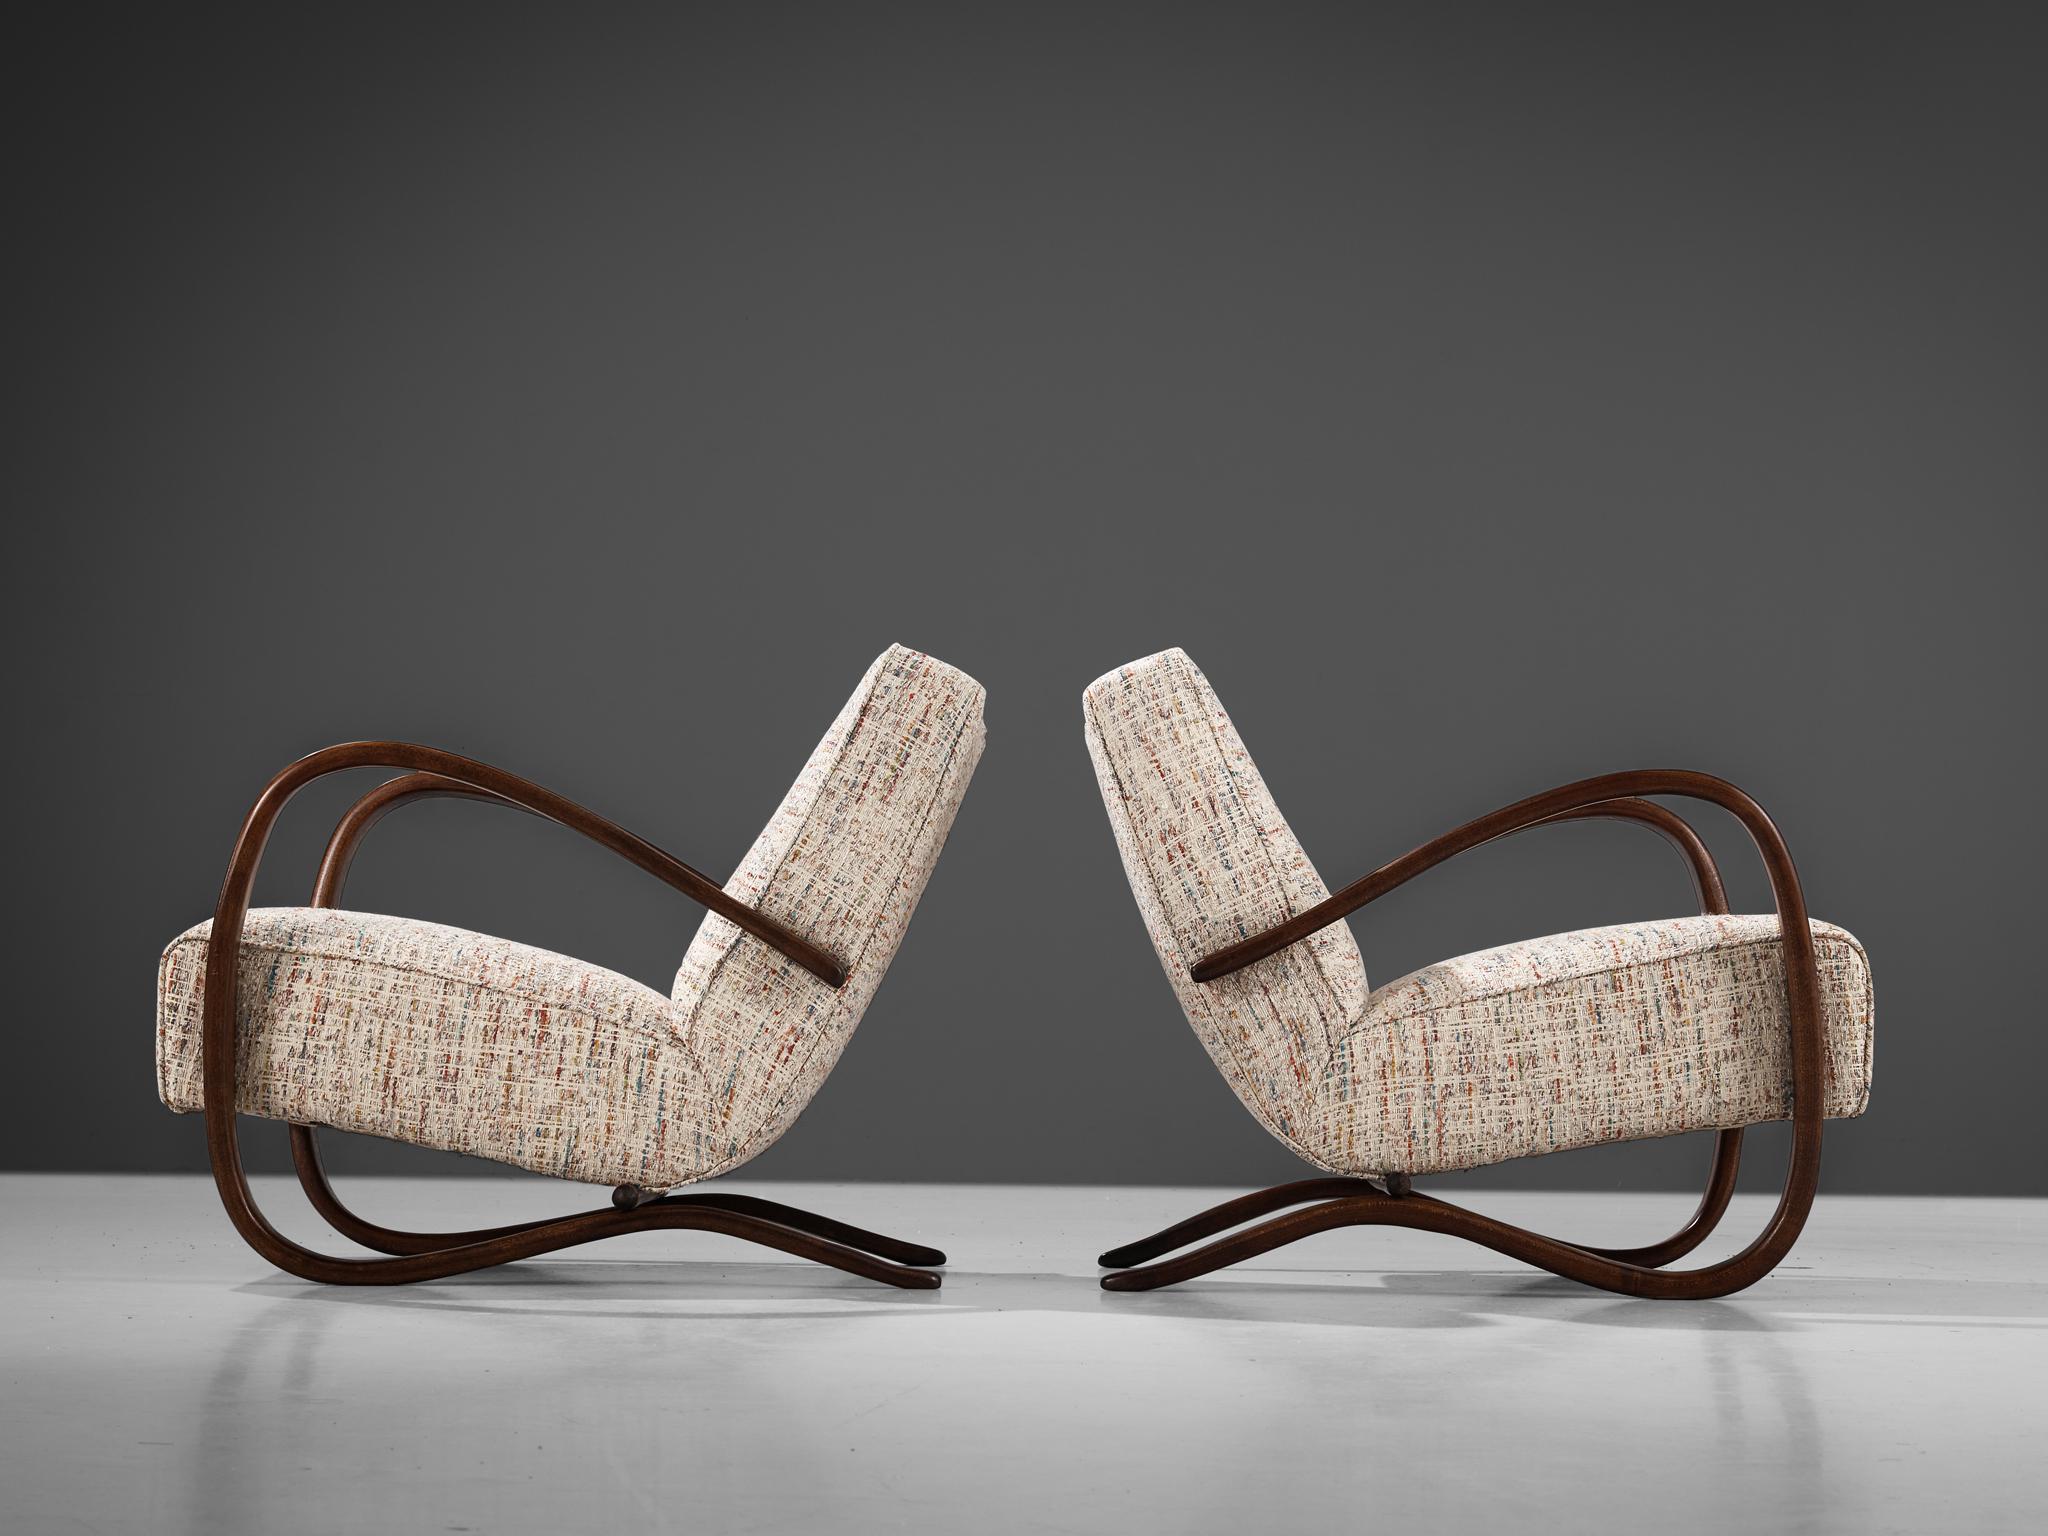 Mid-20th Century Jindrich Halabala Pair of Lounge Chairs in Patterned Upholstery